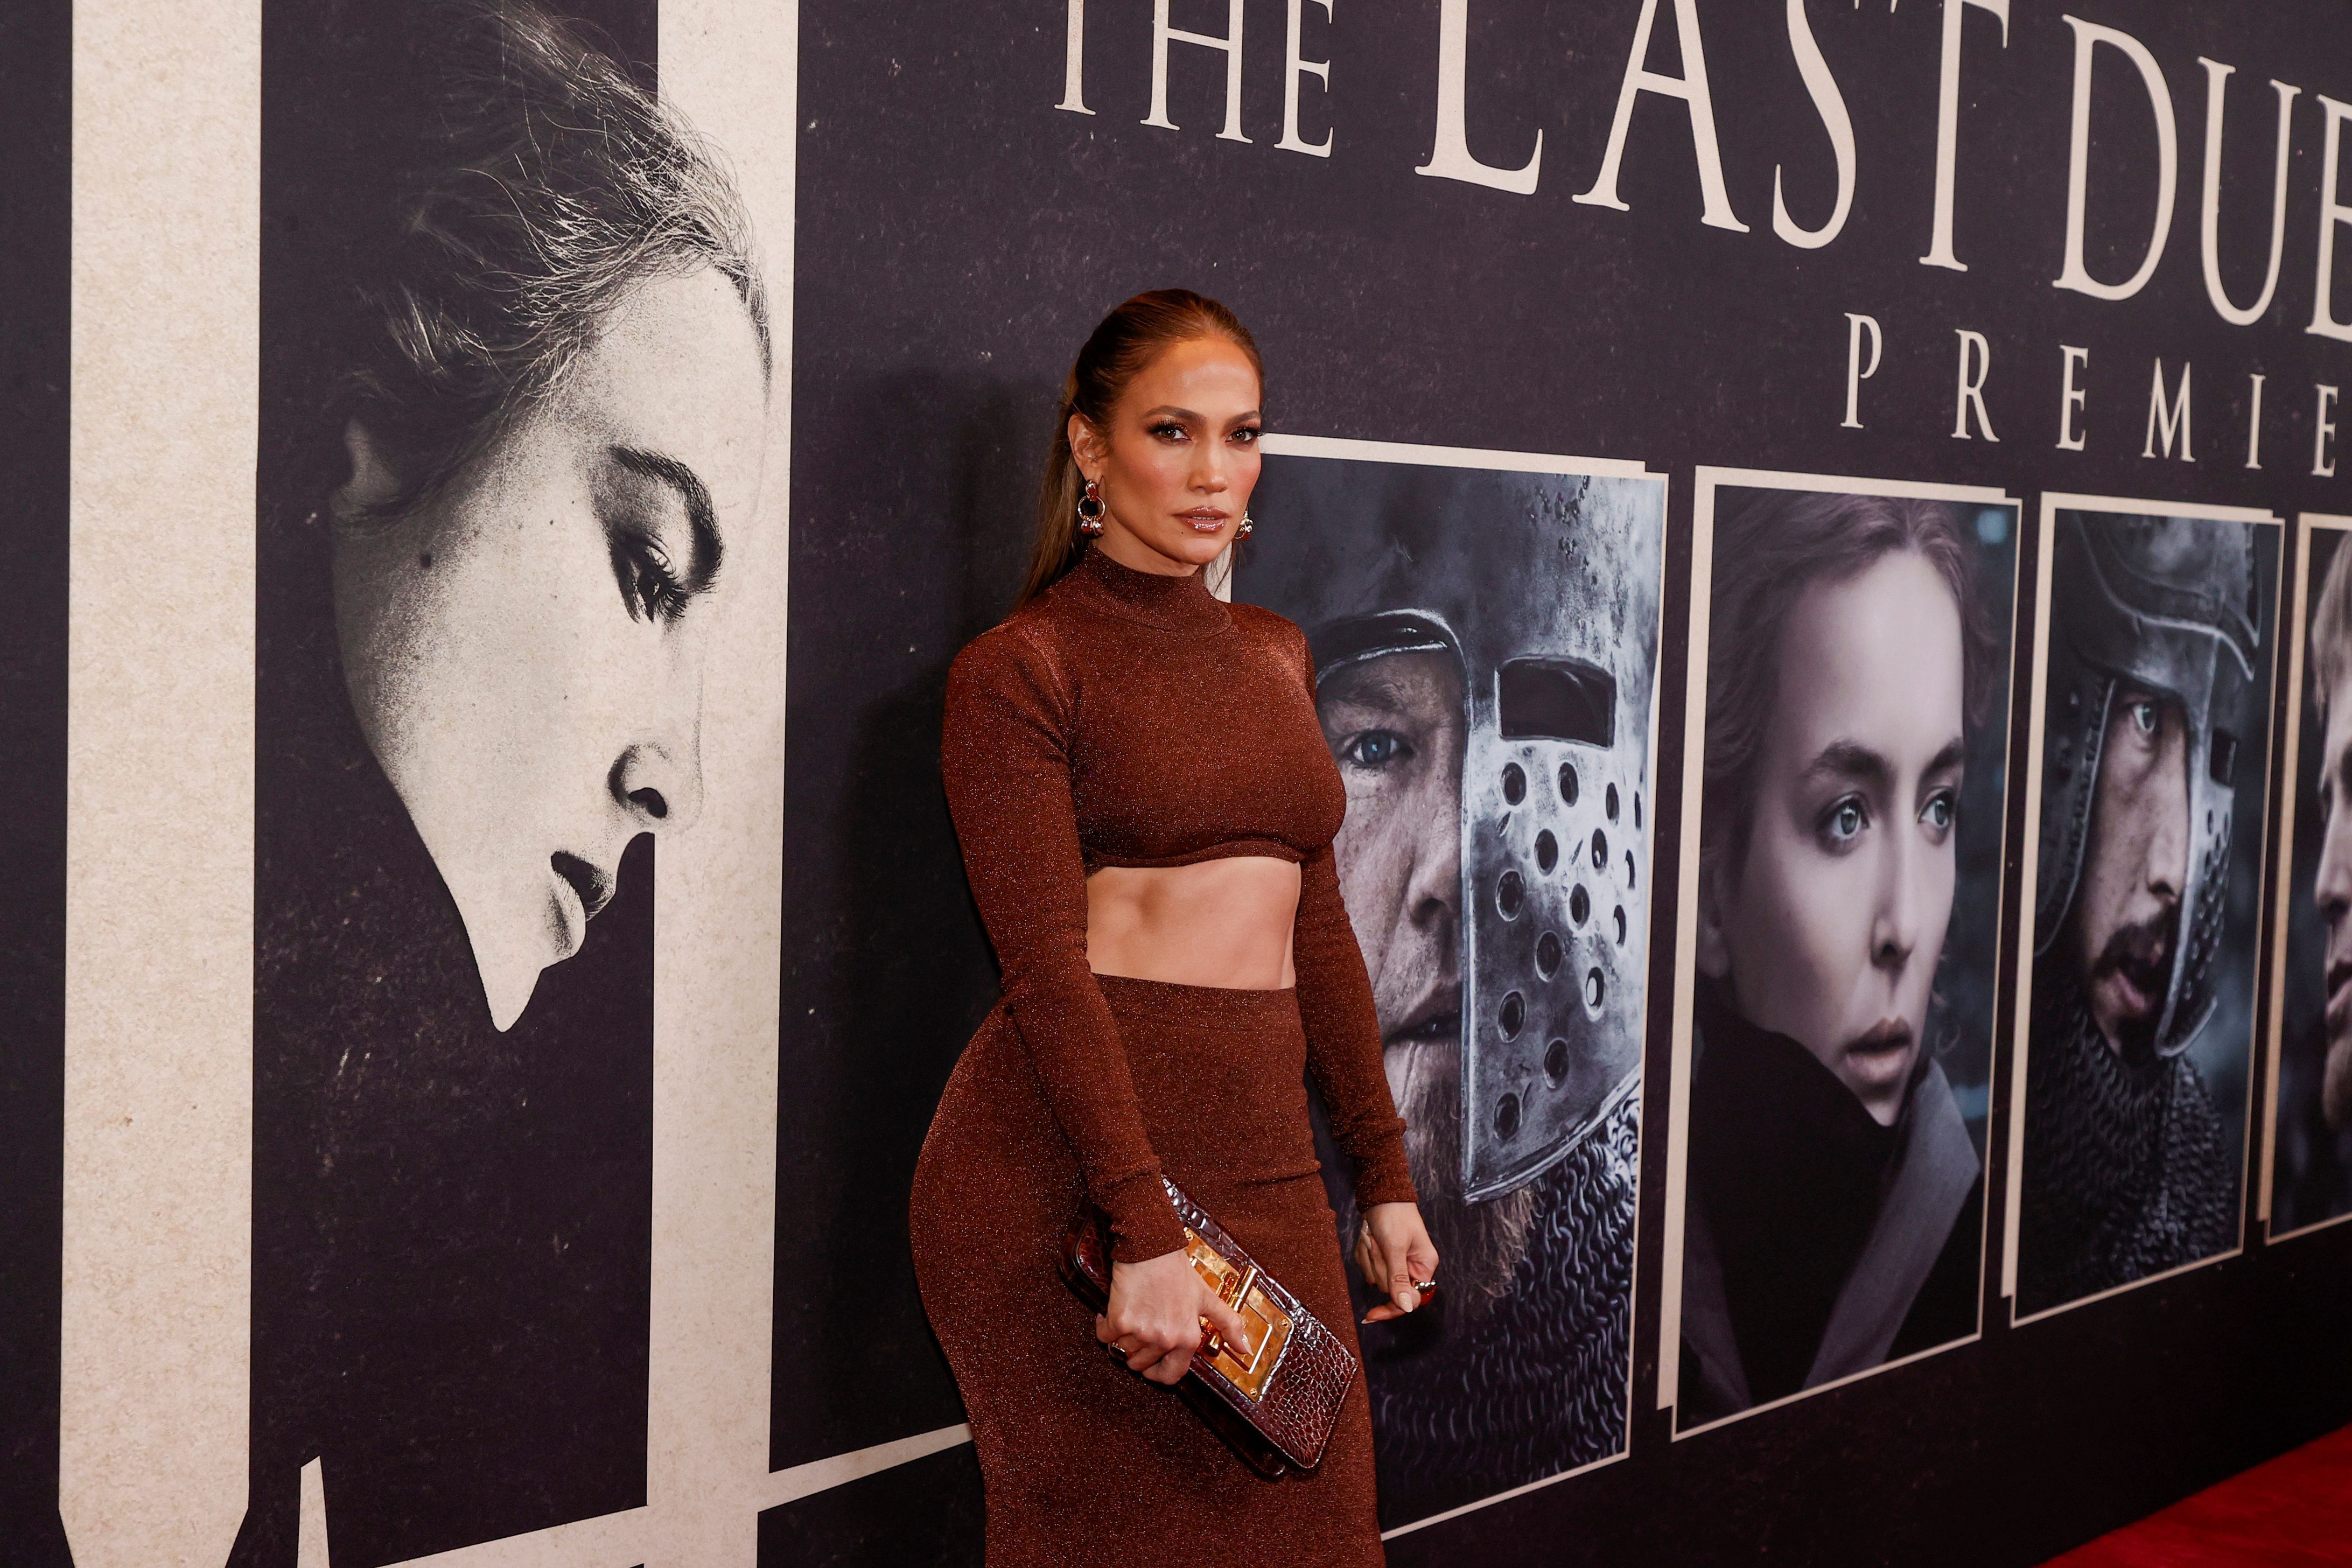 NEW YORK, NEW YORK - OCTOBER 09: Jennifer Lopez attends "The last duel" New York Premiere at Rose Theater at Jazz at Lincoln Center's Frederick P. Rose Hall on October 09, 2021 in New York City.  (Photo by Arturo Holmes / Getty Images)